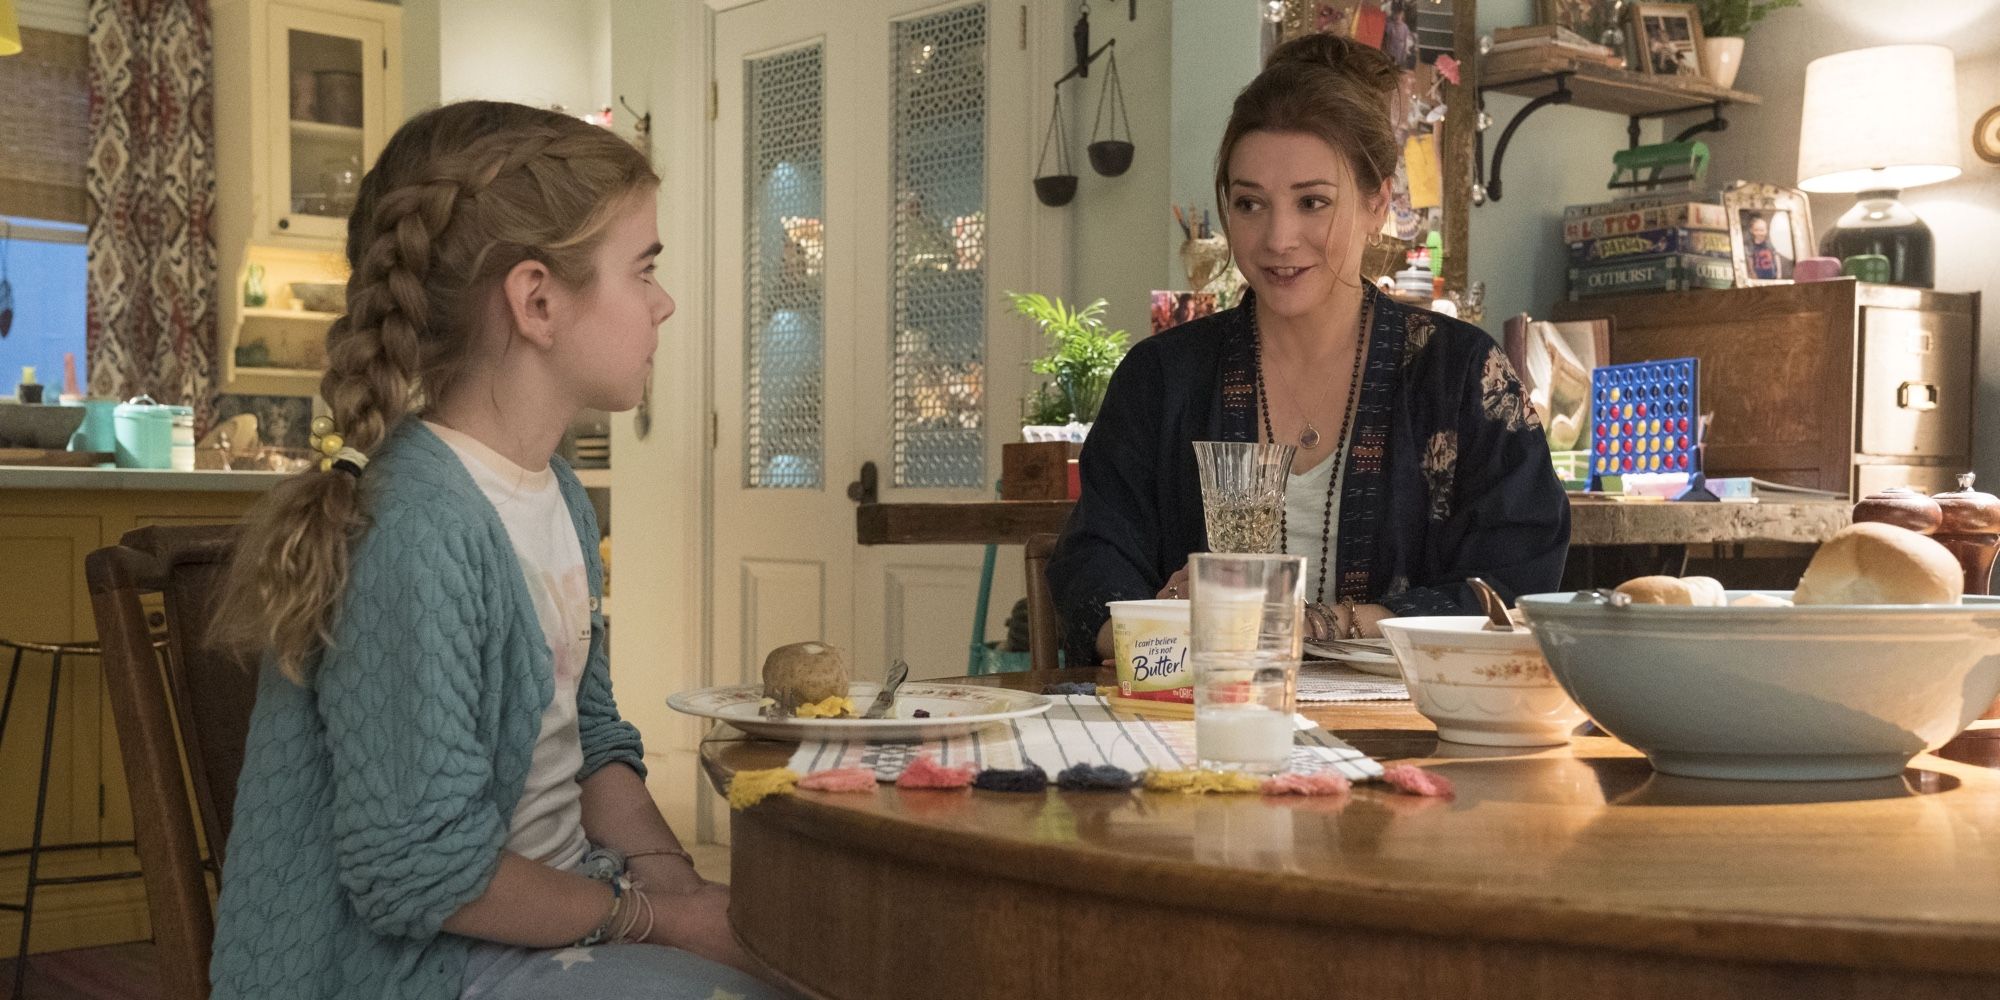 Matilda Lawler and Alyson Hannigan sitting at a dining room table in Flora and Ulysses